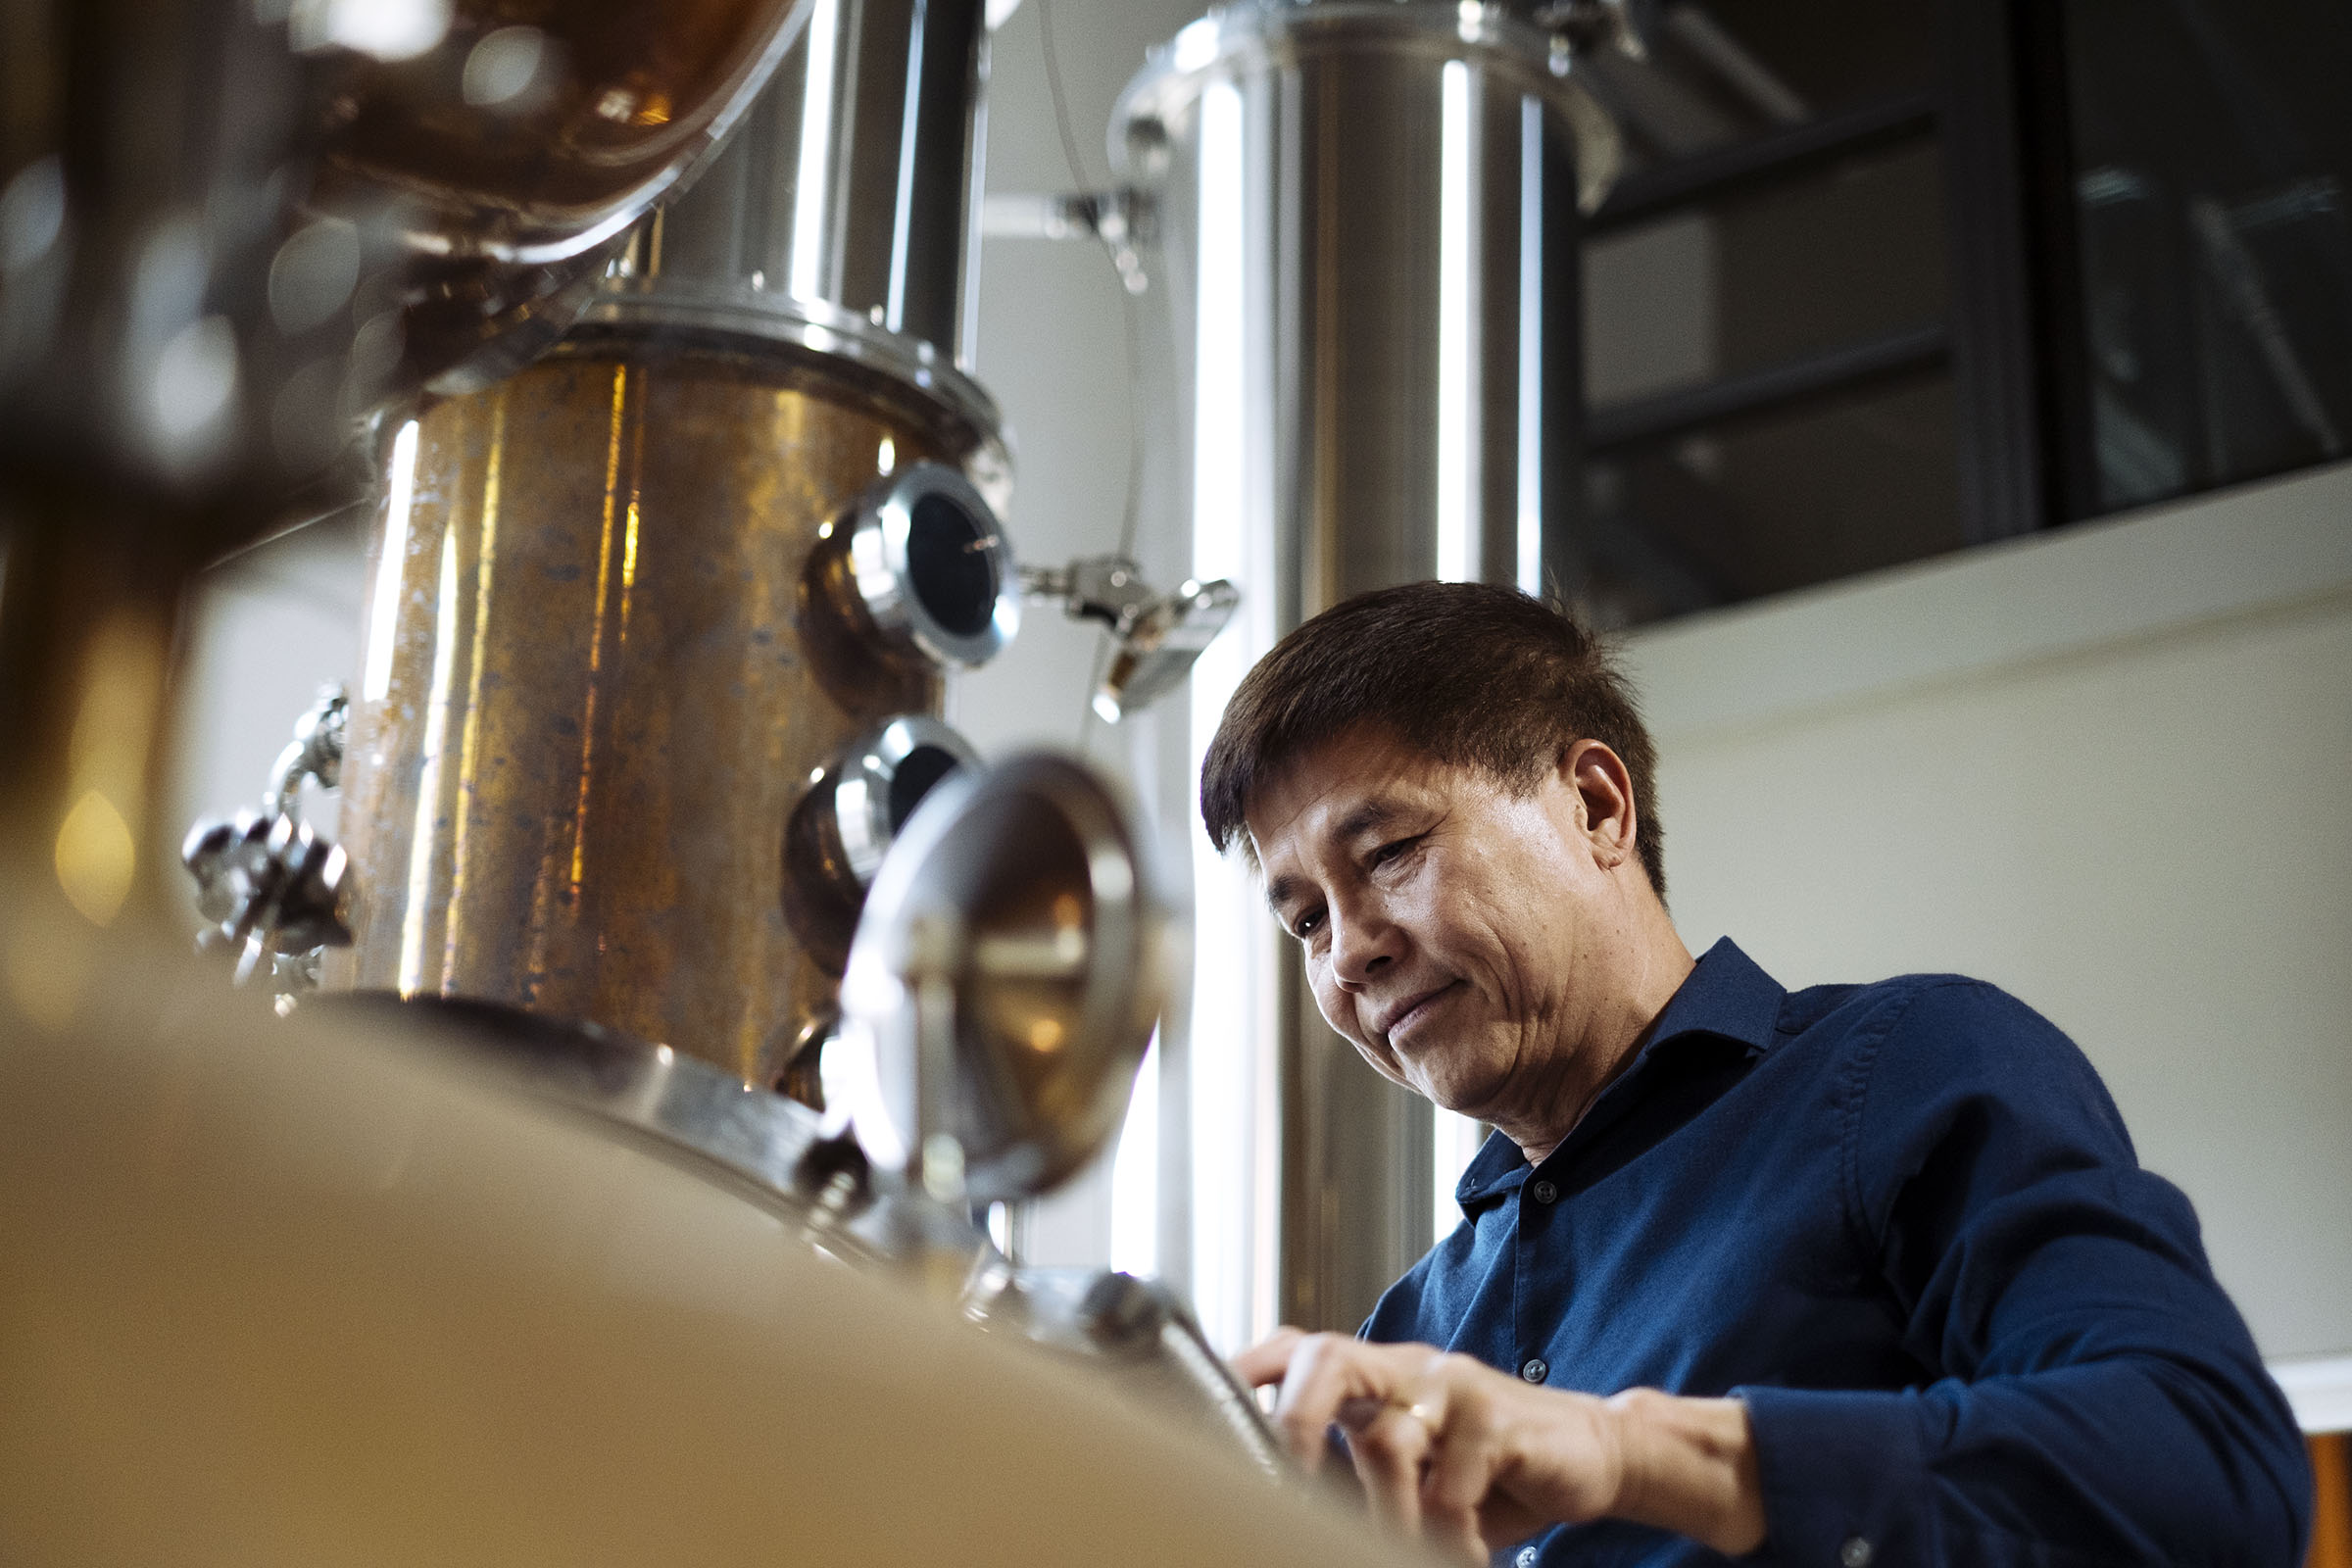 A person in a blue shirt looks at the instruments on brewing equipment